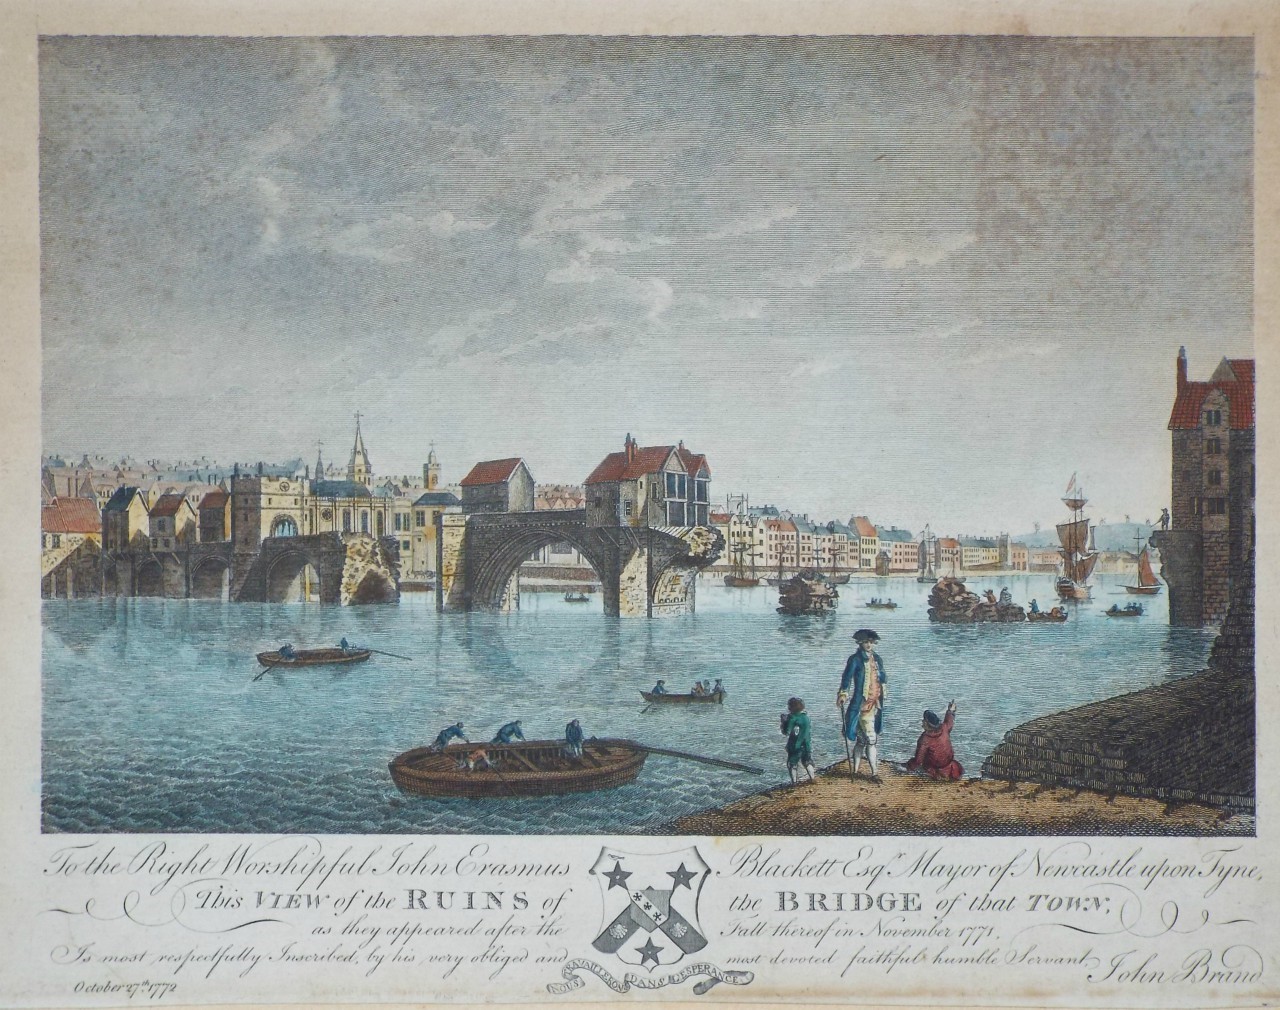 Print - To the Right Worshipful John Erasmus Blacket Esqr Mayor of Newcastle upon Tyne, This View of the Ruins of the Bridge of that Town, as they appeared after the Fall thereof in November 1771, Is most respectfully Inscribed, by ... John Brand.